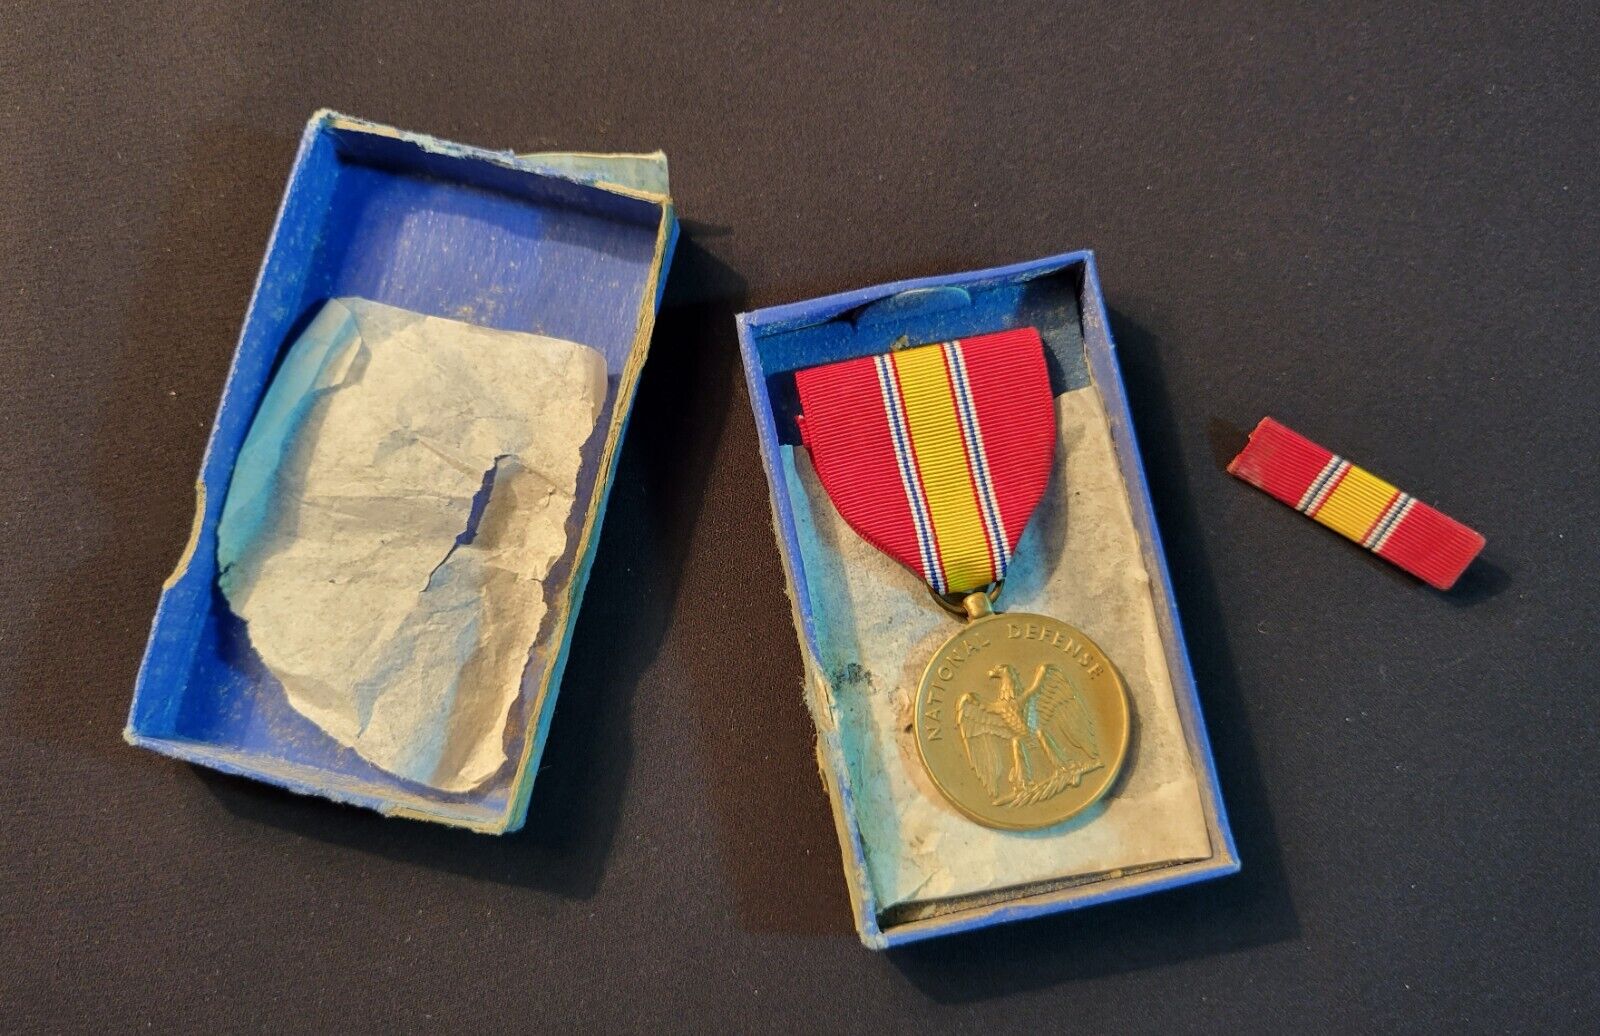 National Defense Military Medal and Ribbon with original Box - WWII Era